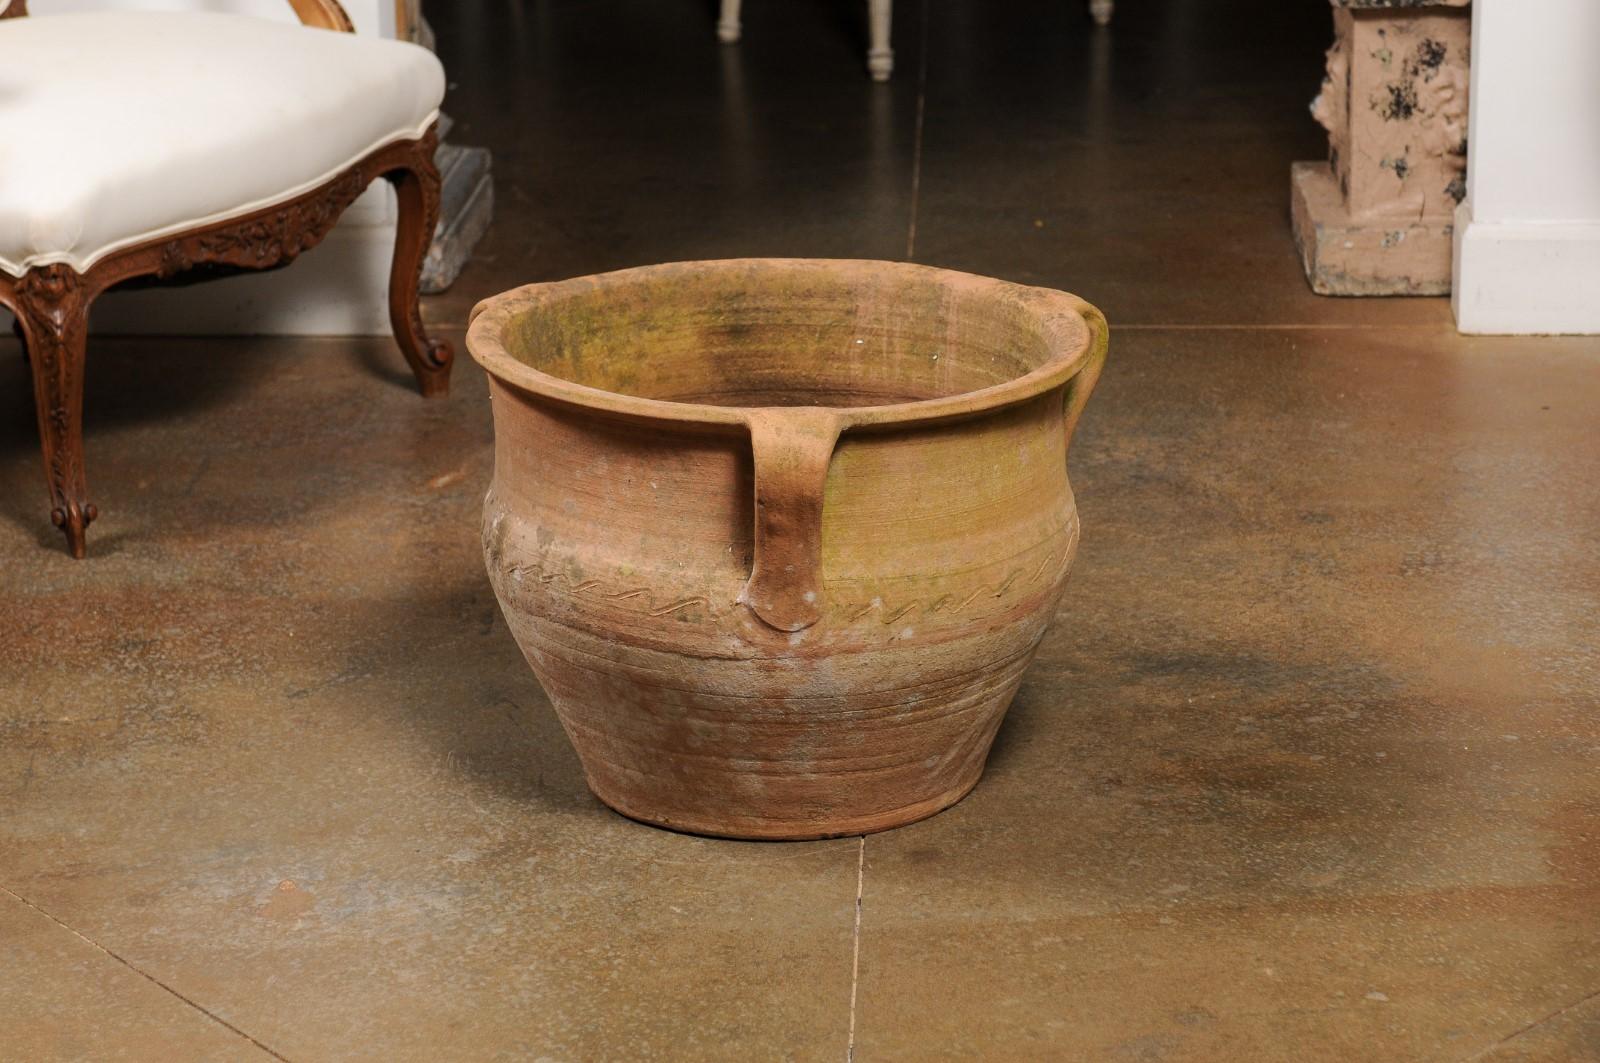 English Turn of the Century Terracotta Planter with Handles and Incised Waves 4